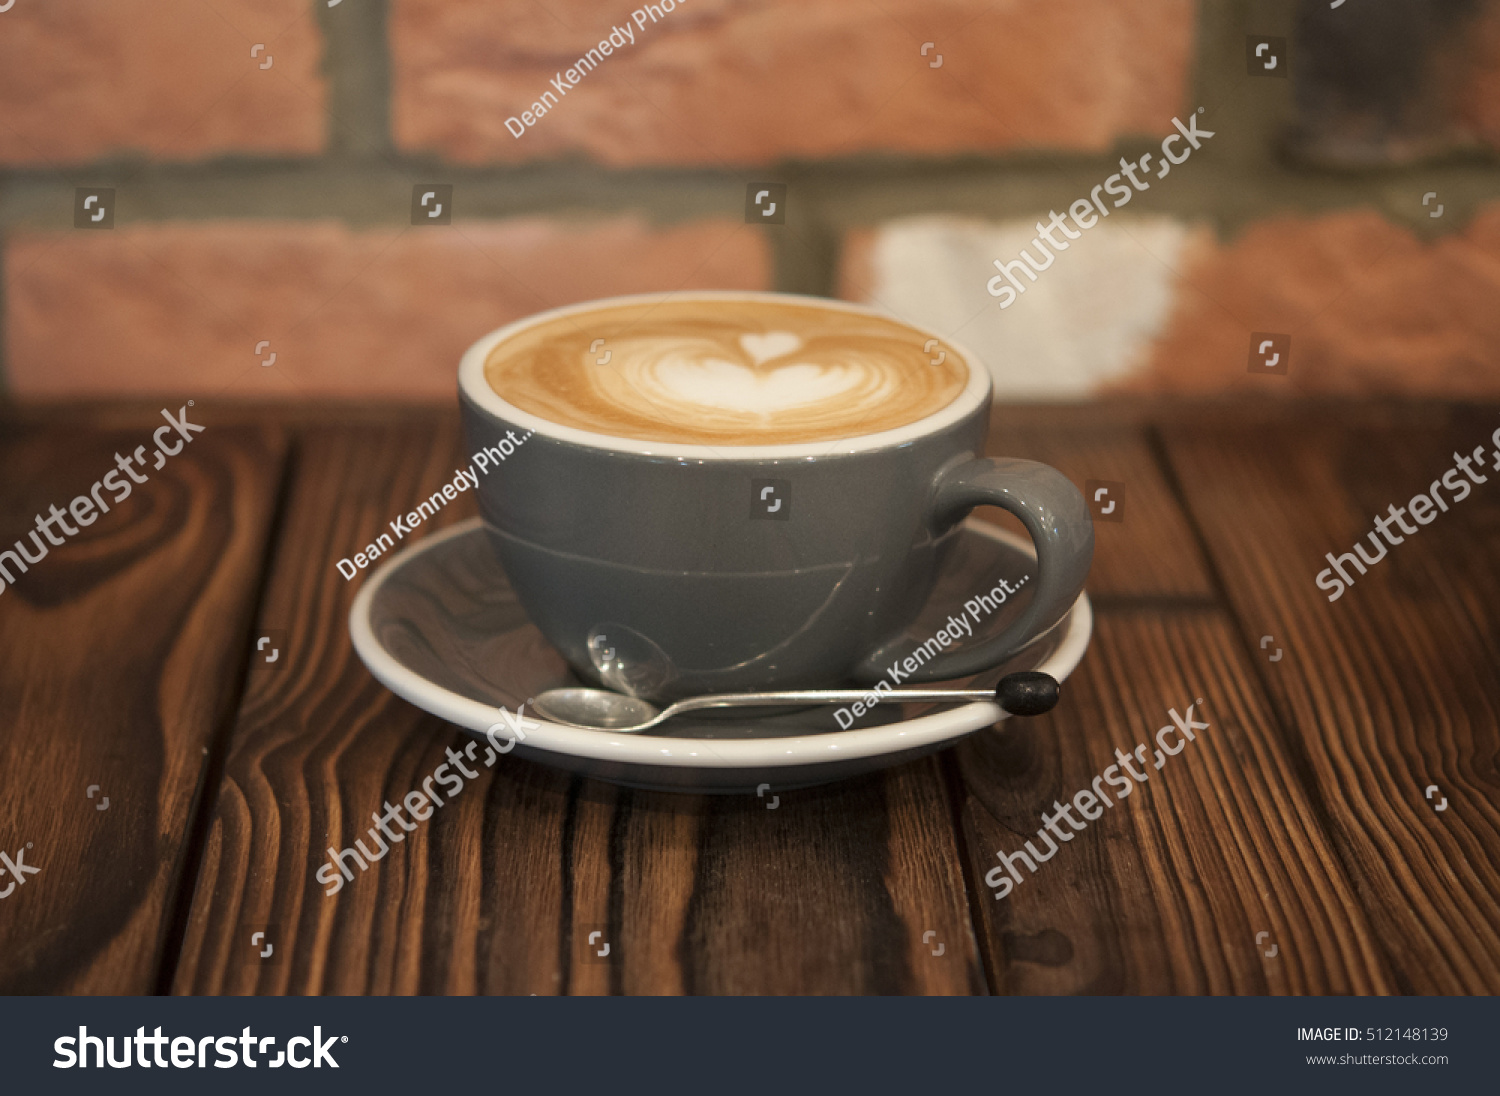 Photo of coffee in a cup, with a decorative design. Taken on wood with brick background #512148139